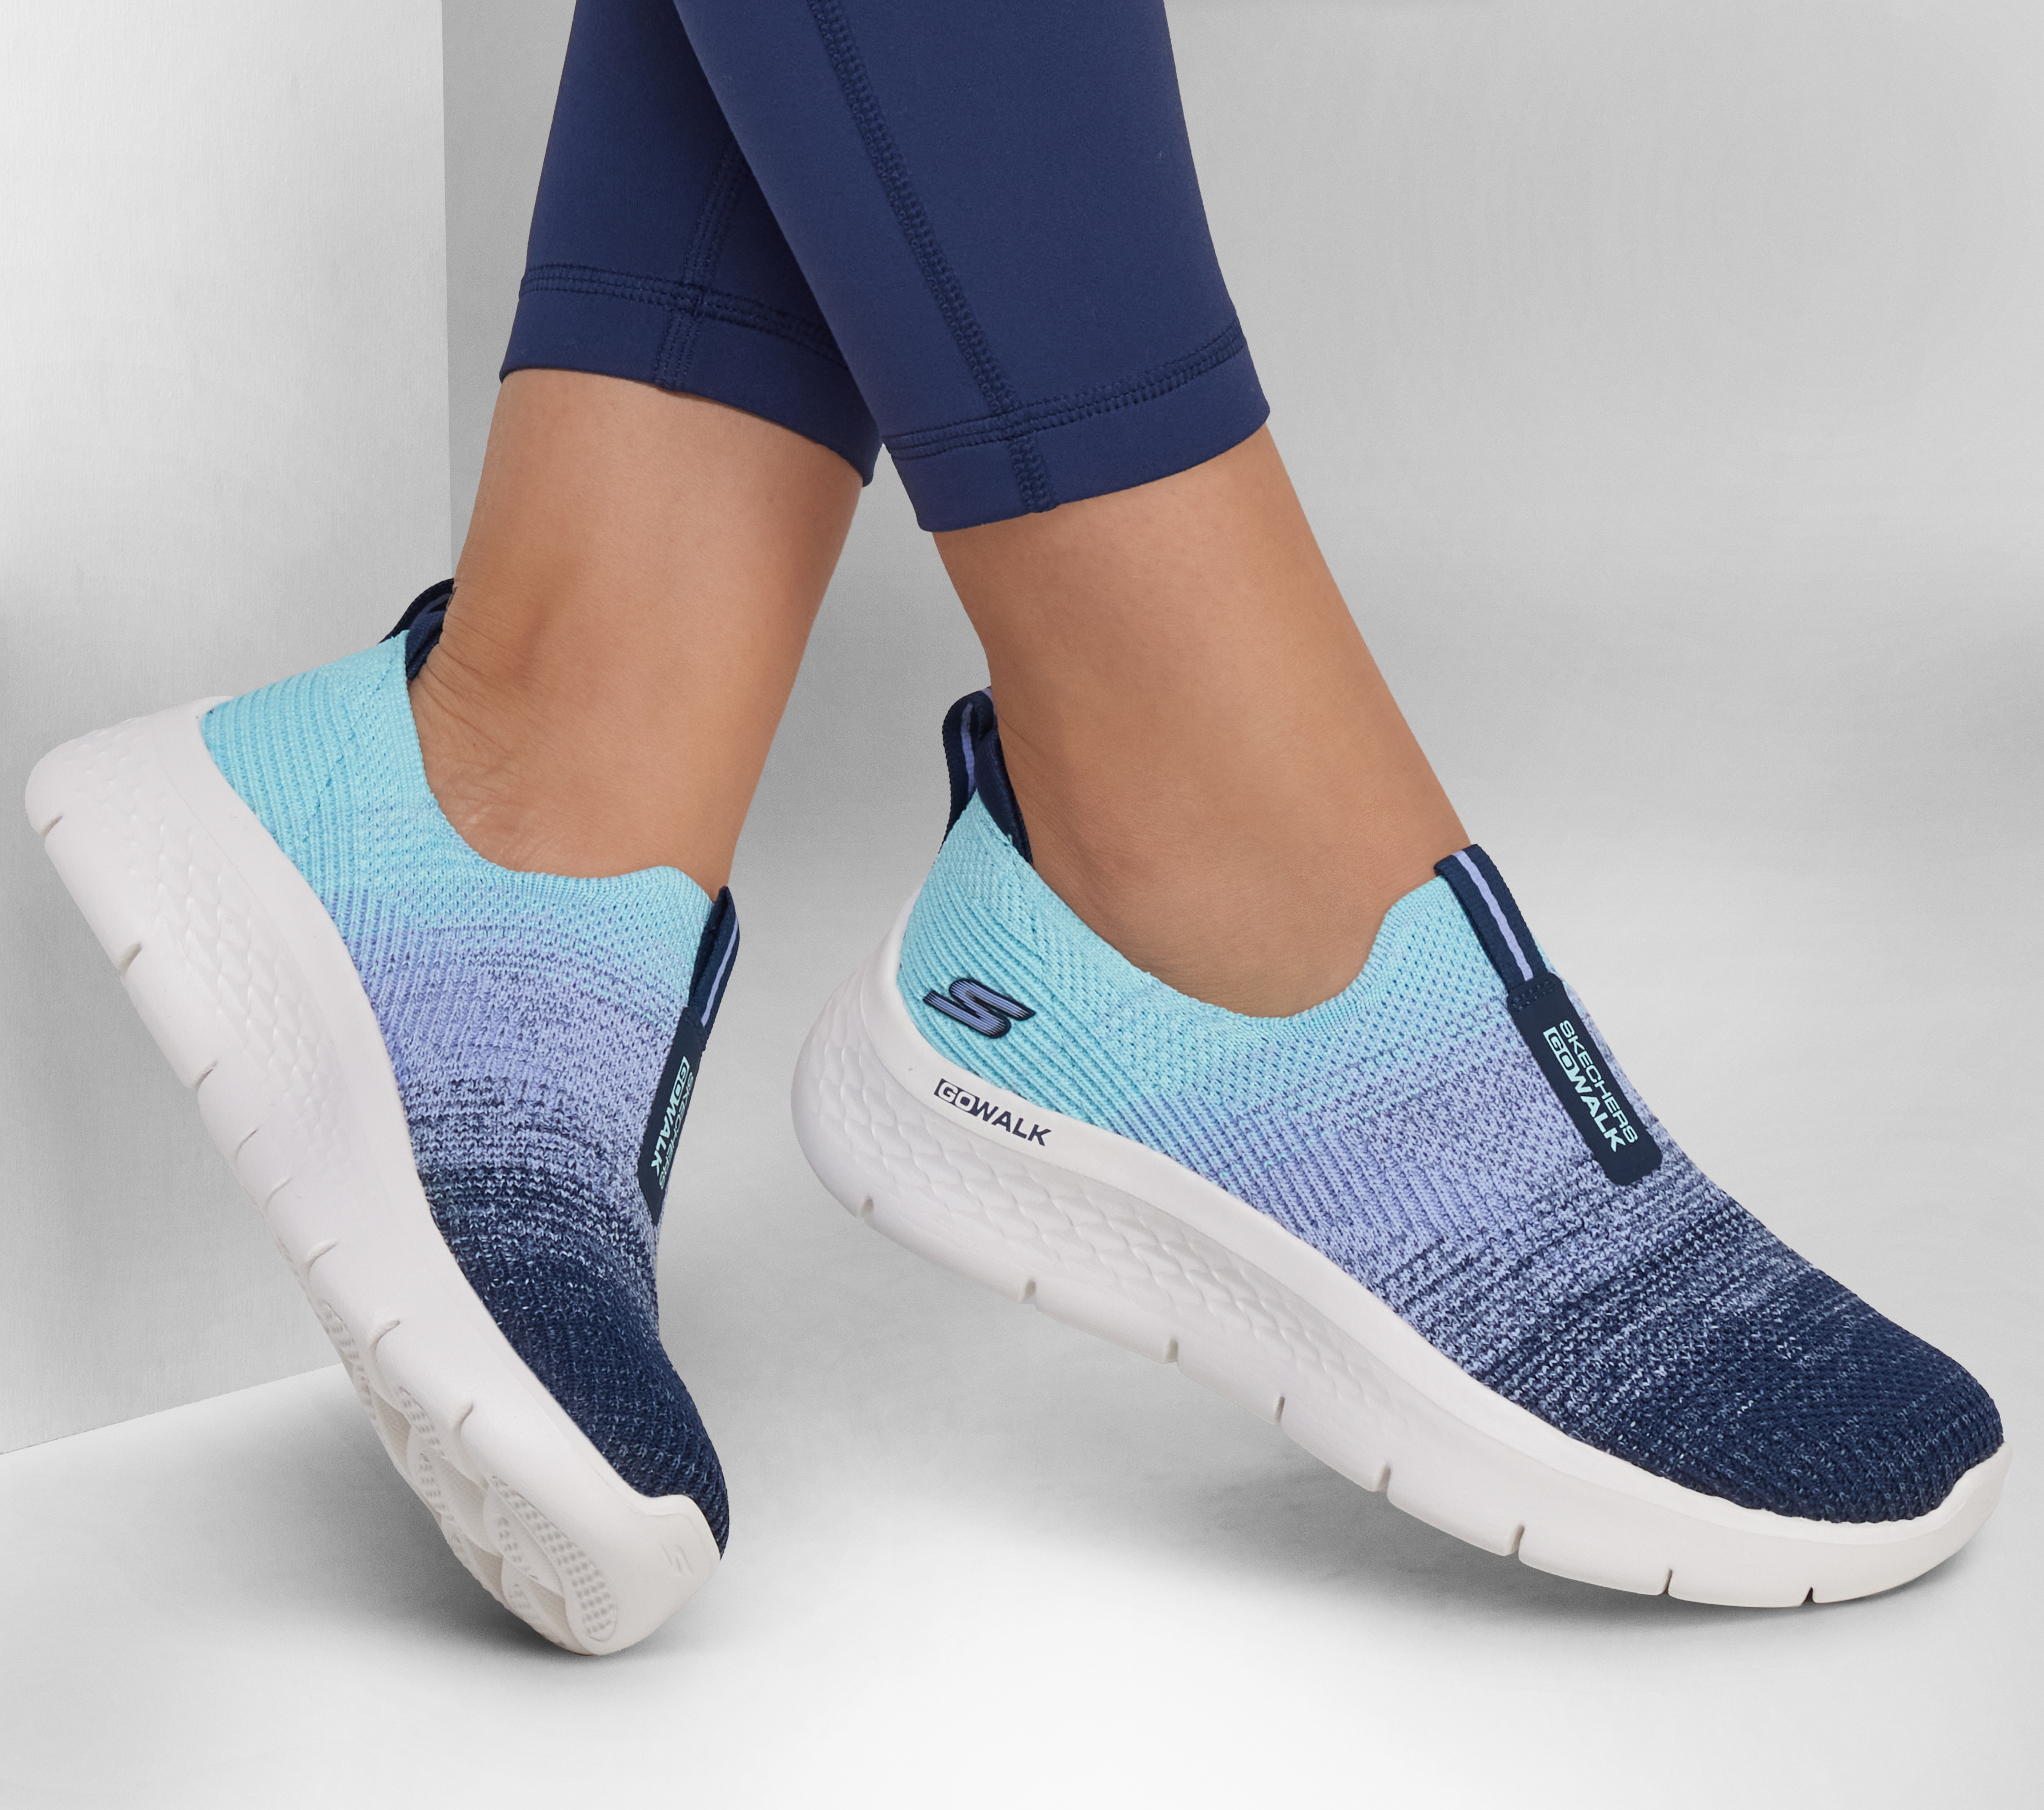 SKECHERS - Let's go walk! 20% OFF GO WALK shoes and pants with code  GOWALK20 👟👌😎 Offer ends July 4. Exclusions may apply. Shop Now